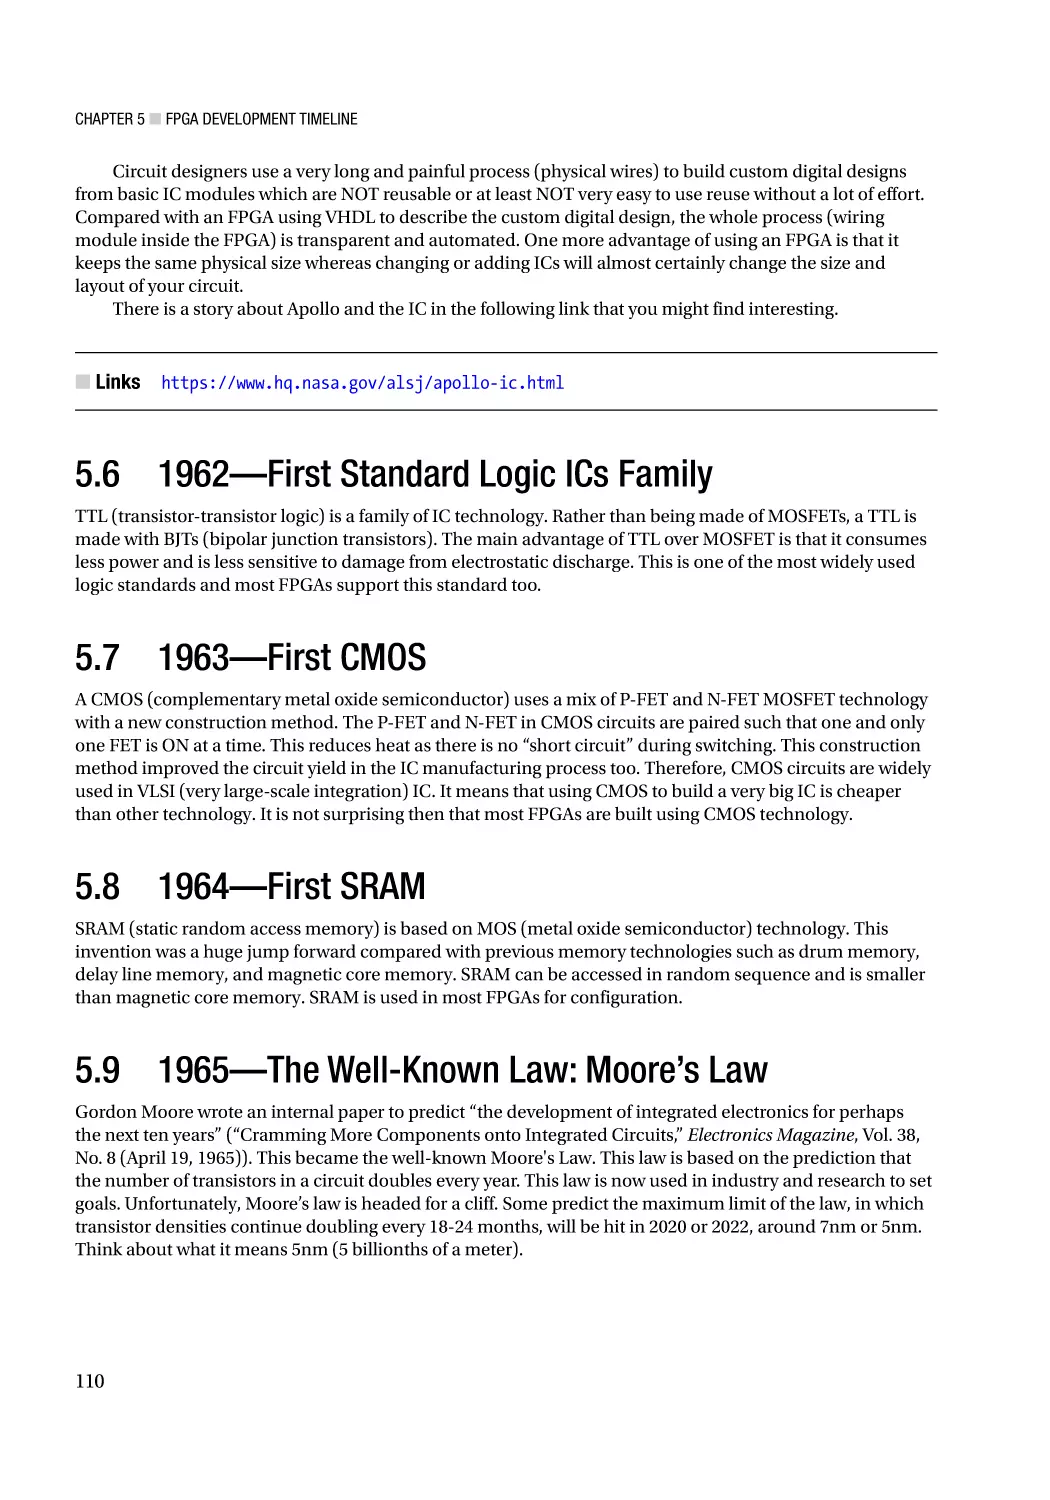 5.6 1962—First Standard Logic ICs Family
5.7 1963—First CMOS
5.8 1964—First SRAM
5.9 1965—The Well-Known Law